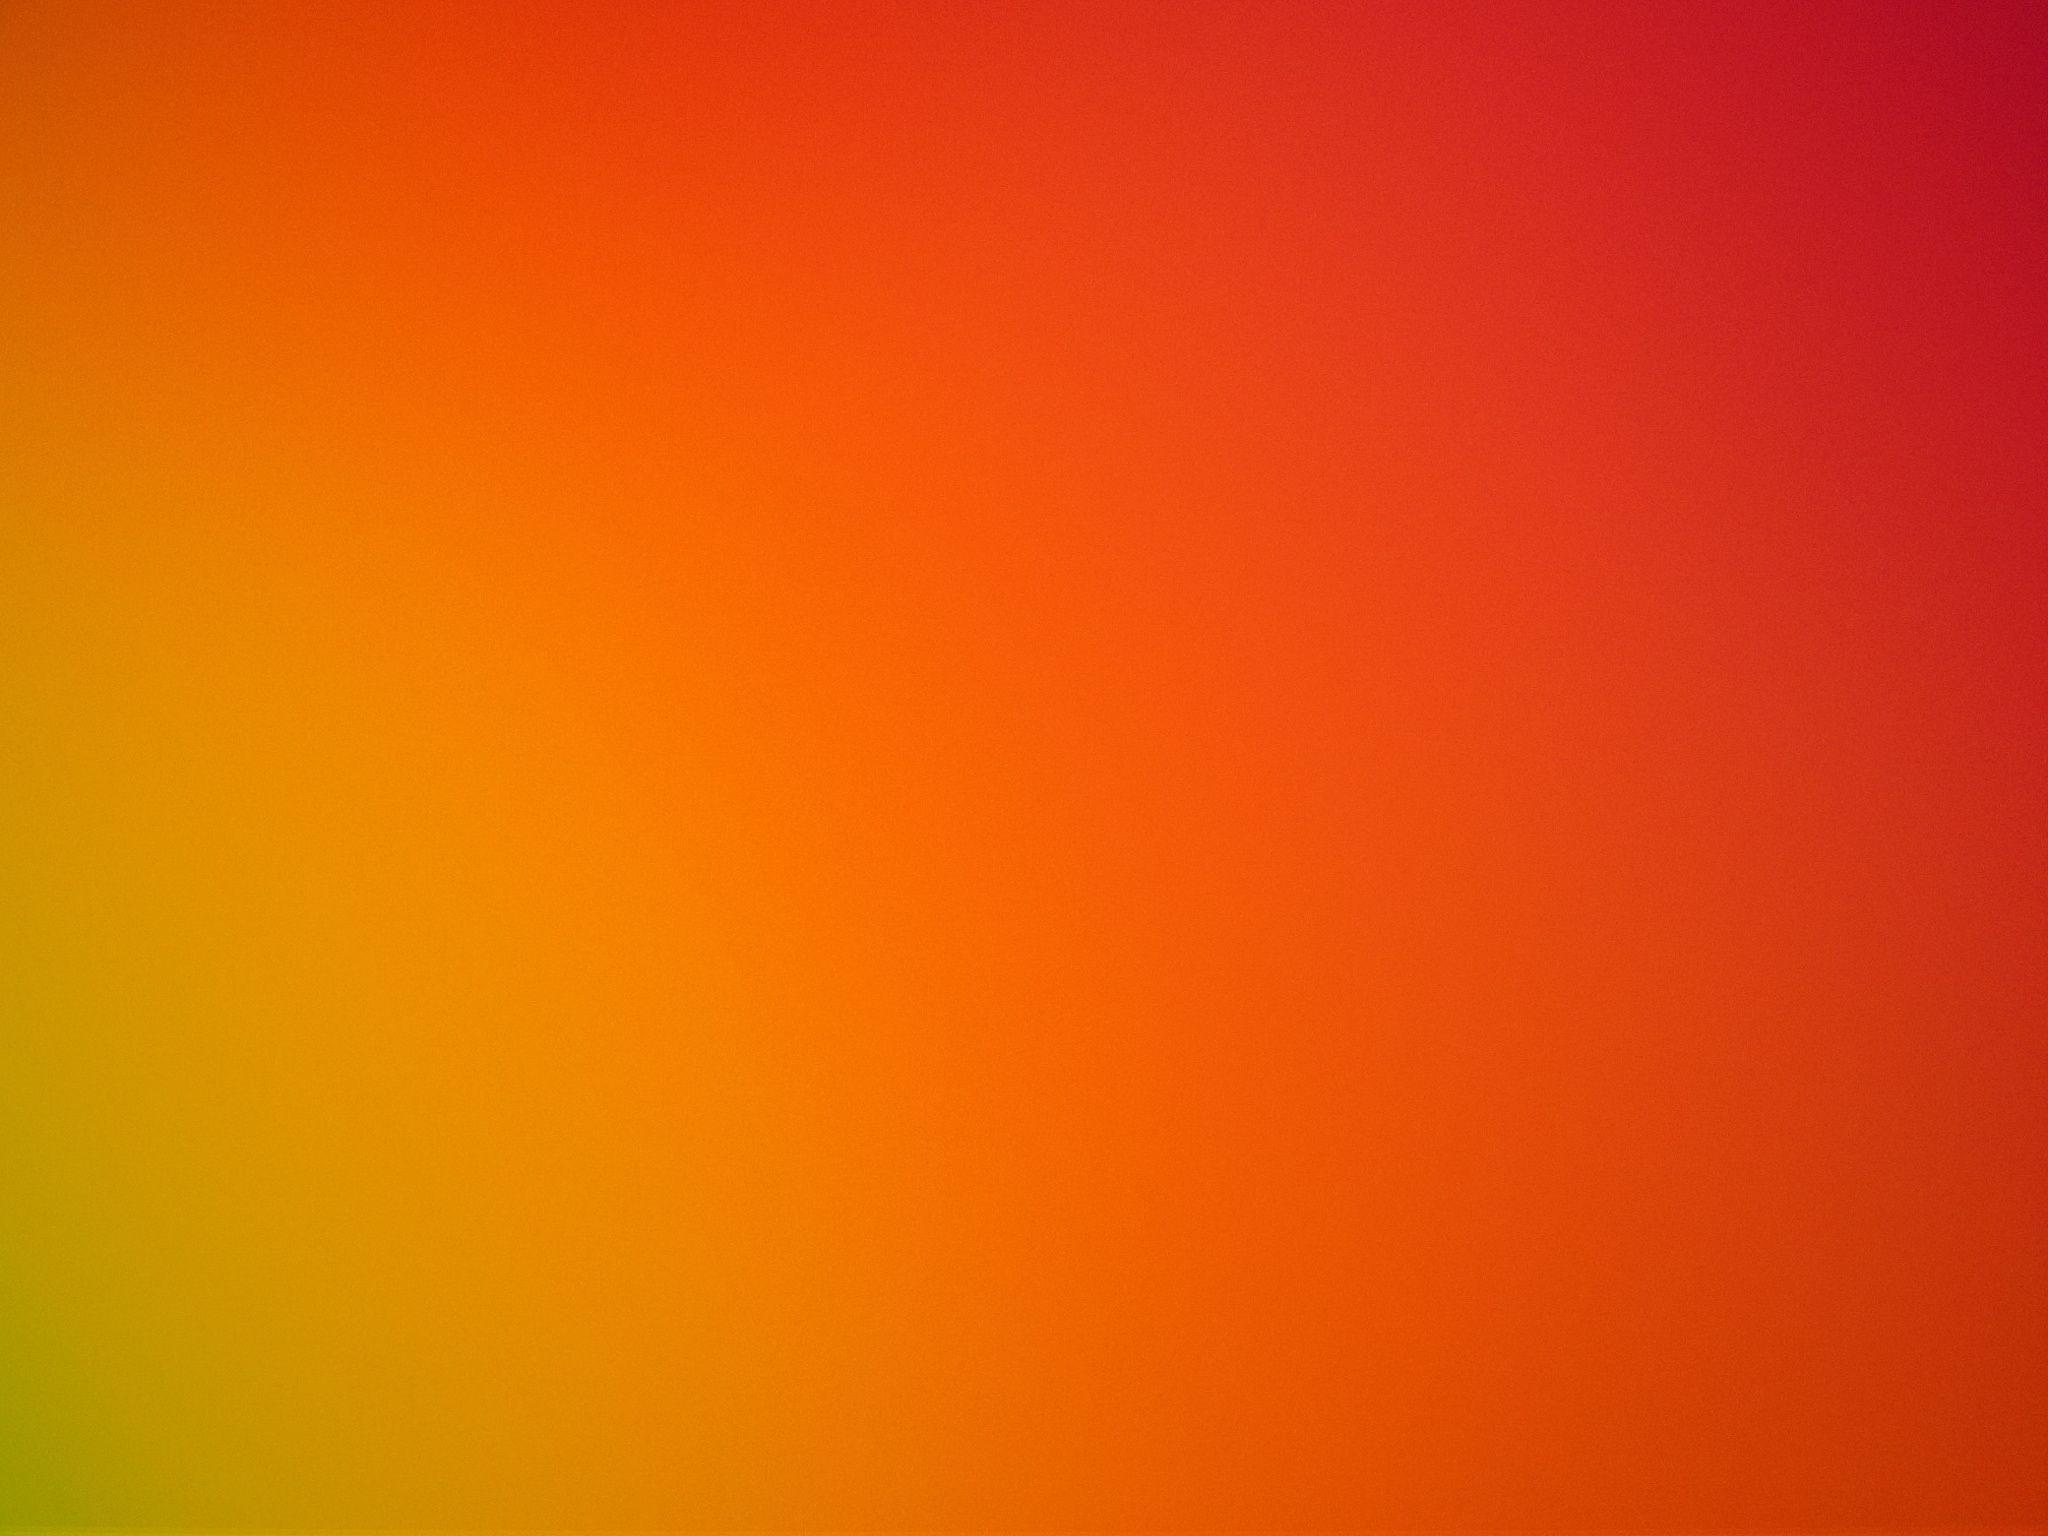 Color gradient background suggesting spirituality, serenity